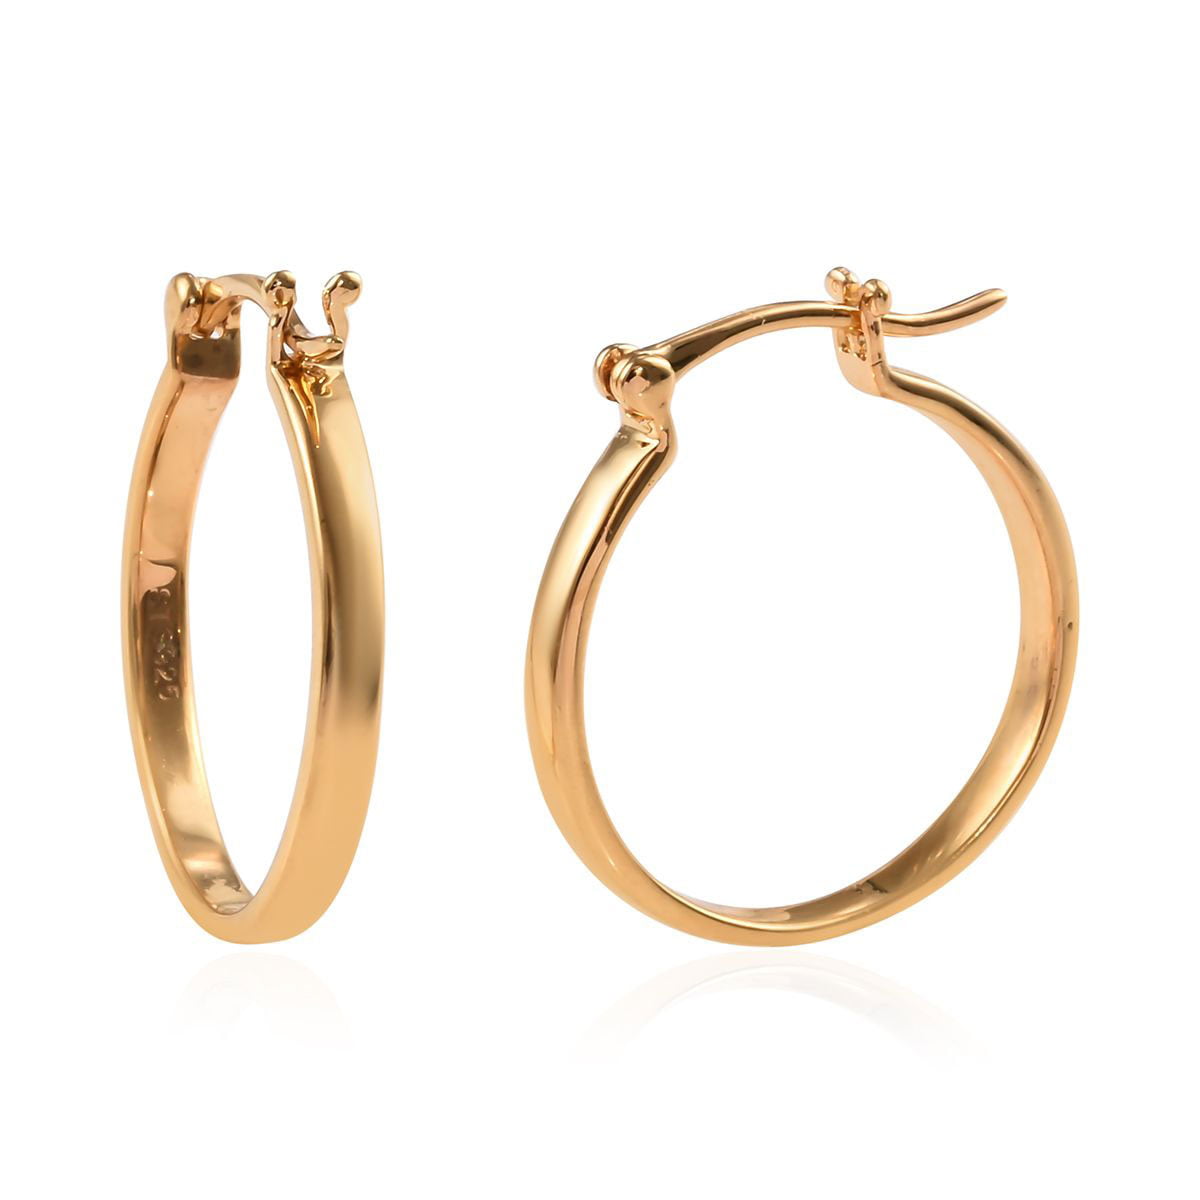 Shop LC - 925 Sterling Silver 14K Yellow Gold Plated Hoop Earrings